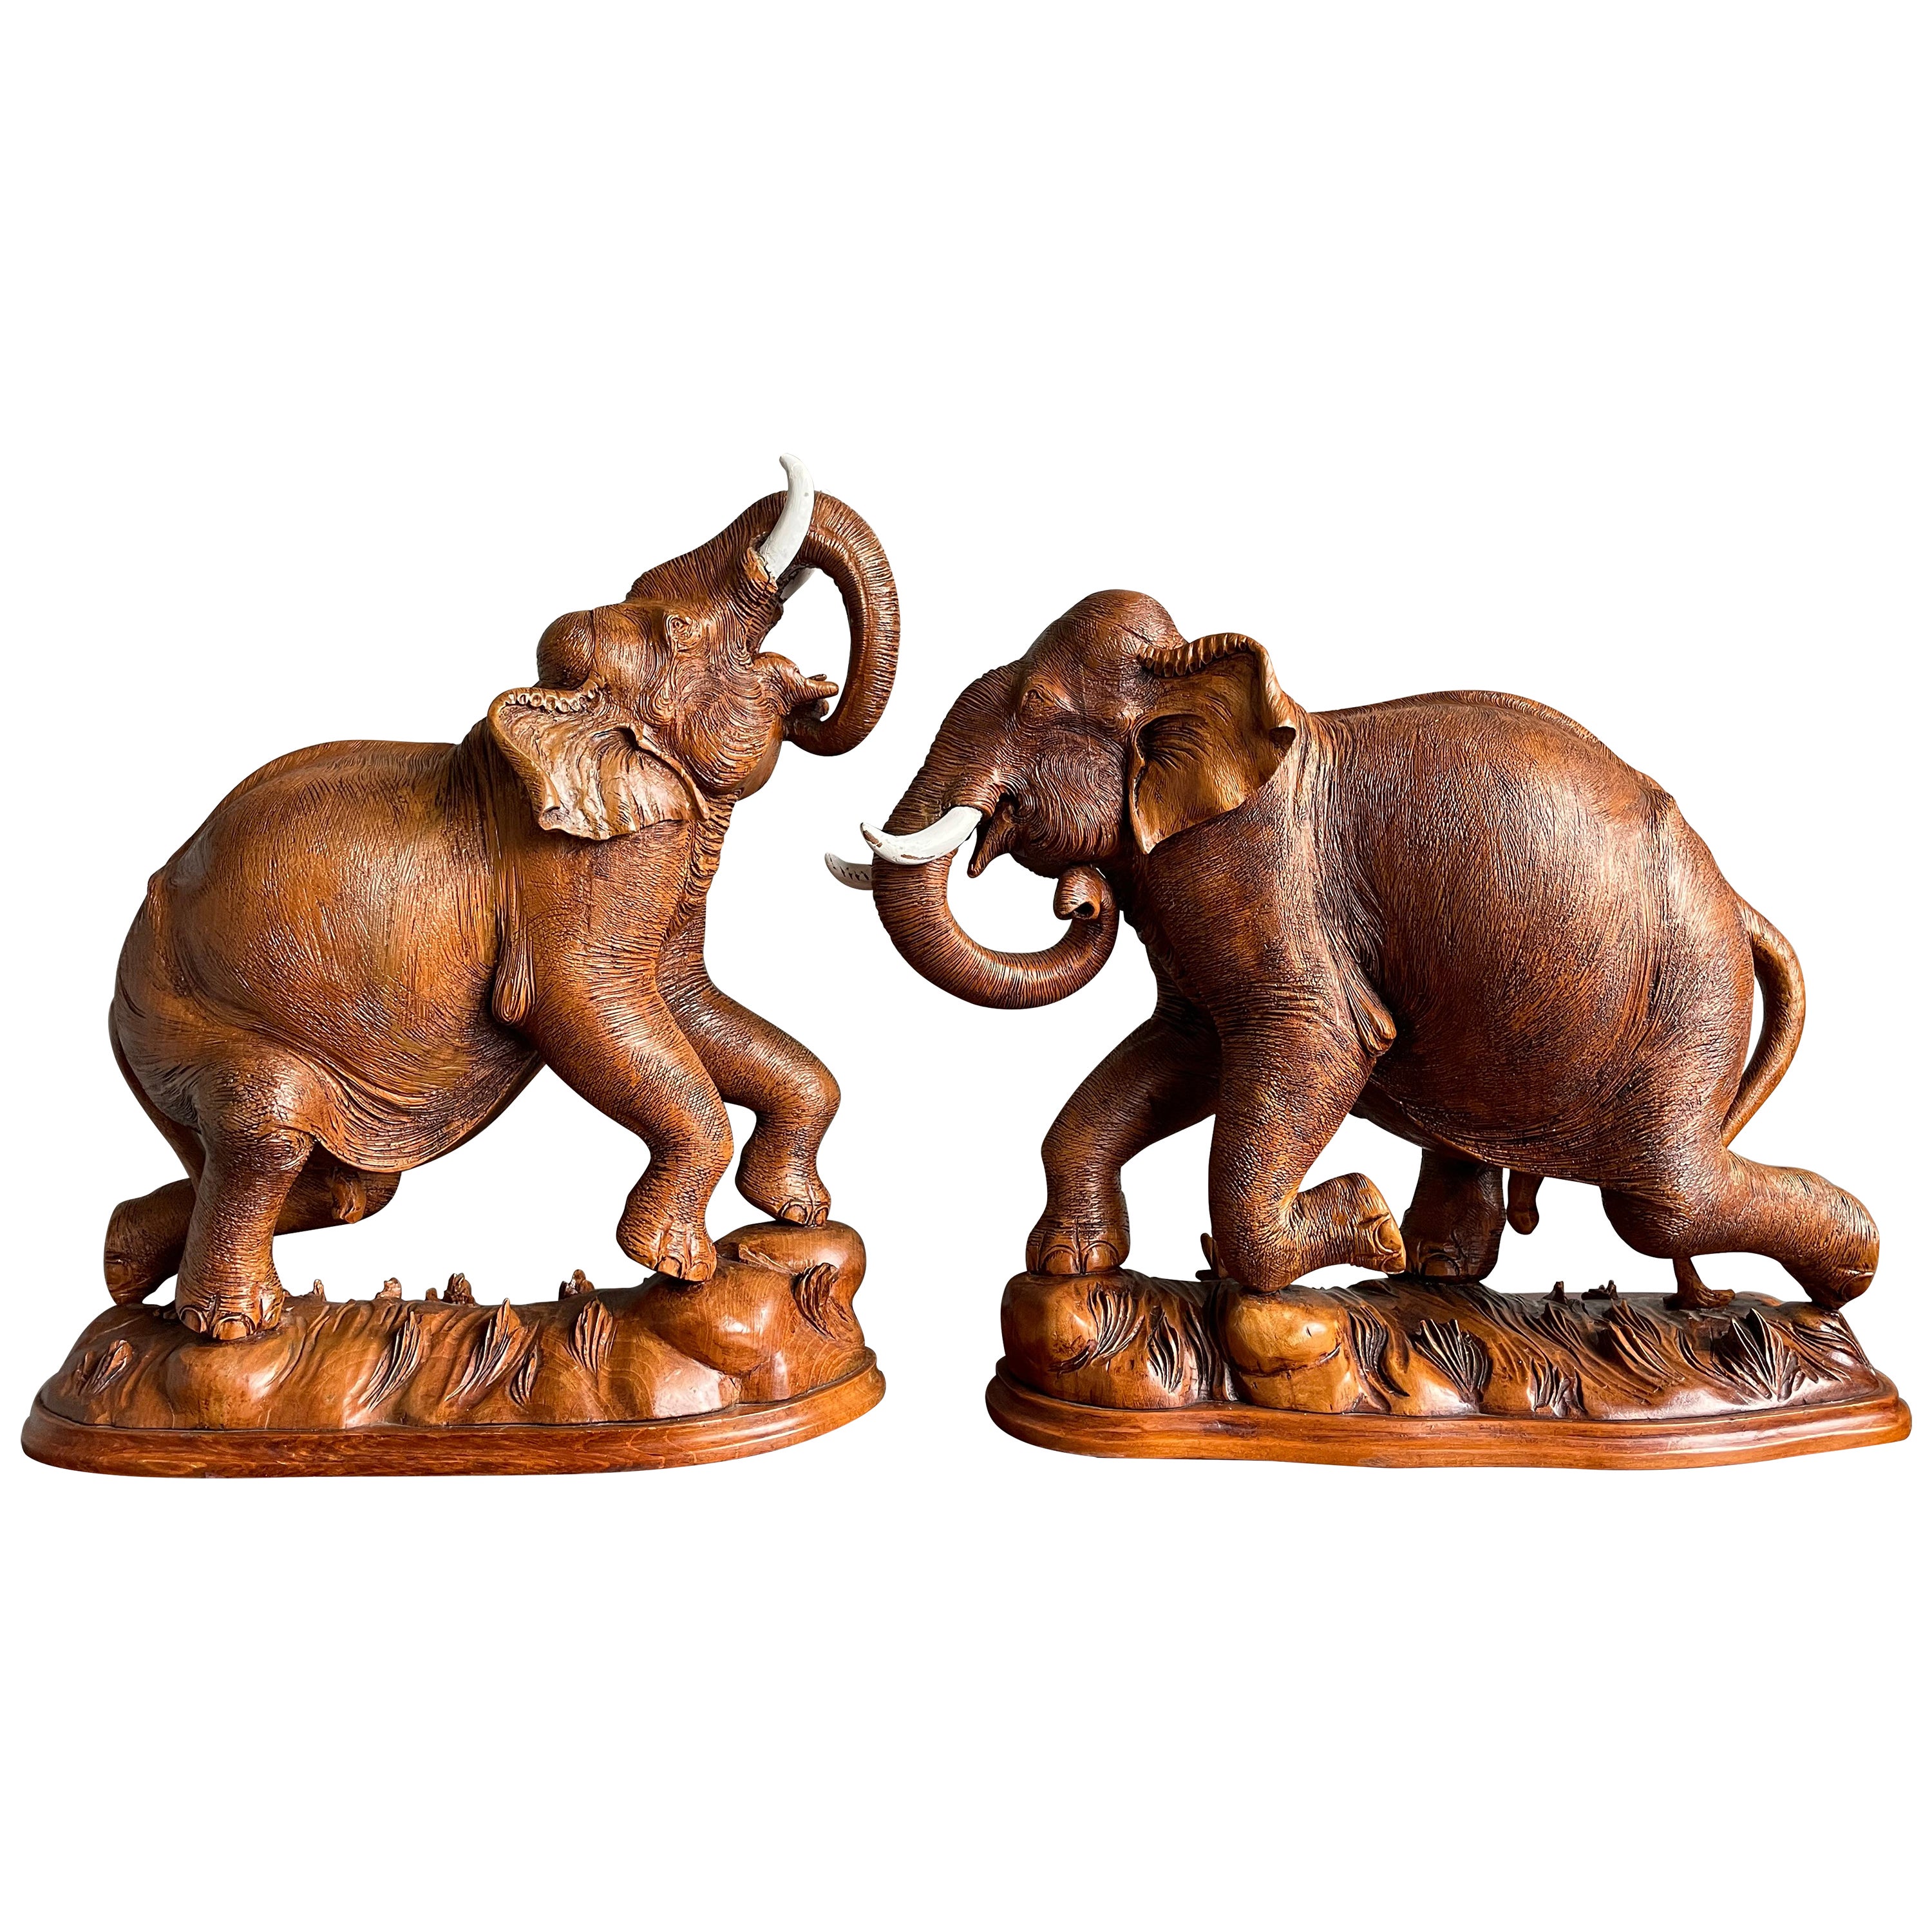 Large & Incredibly Detailed Midcentury Hand Carved Teak Elephant Sculpture Pair For Sale